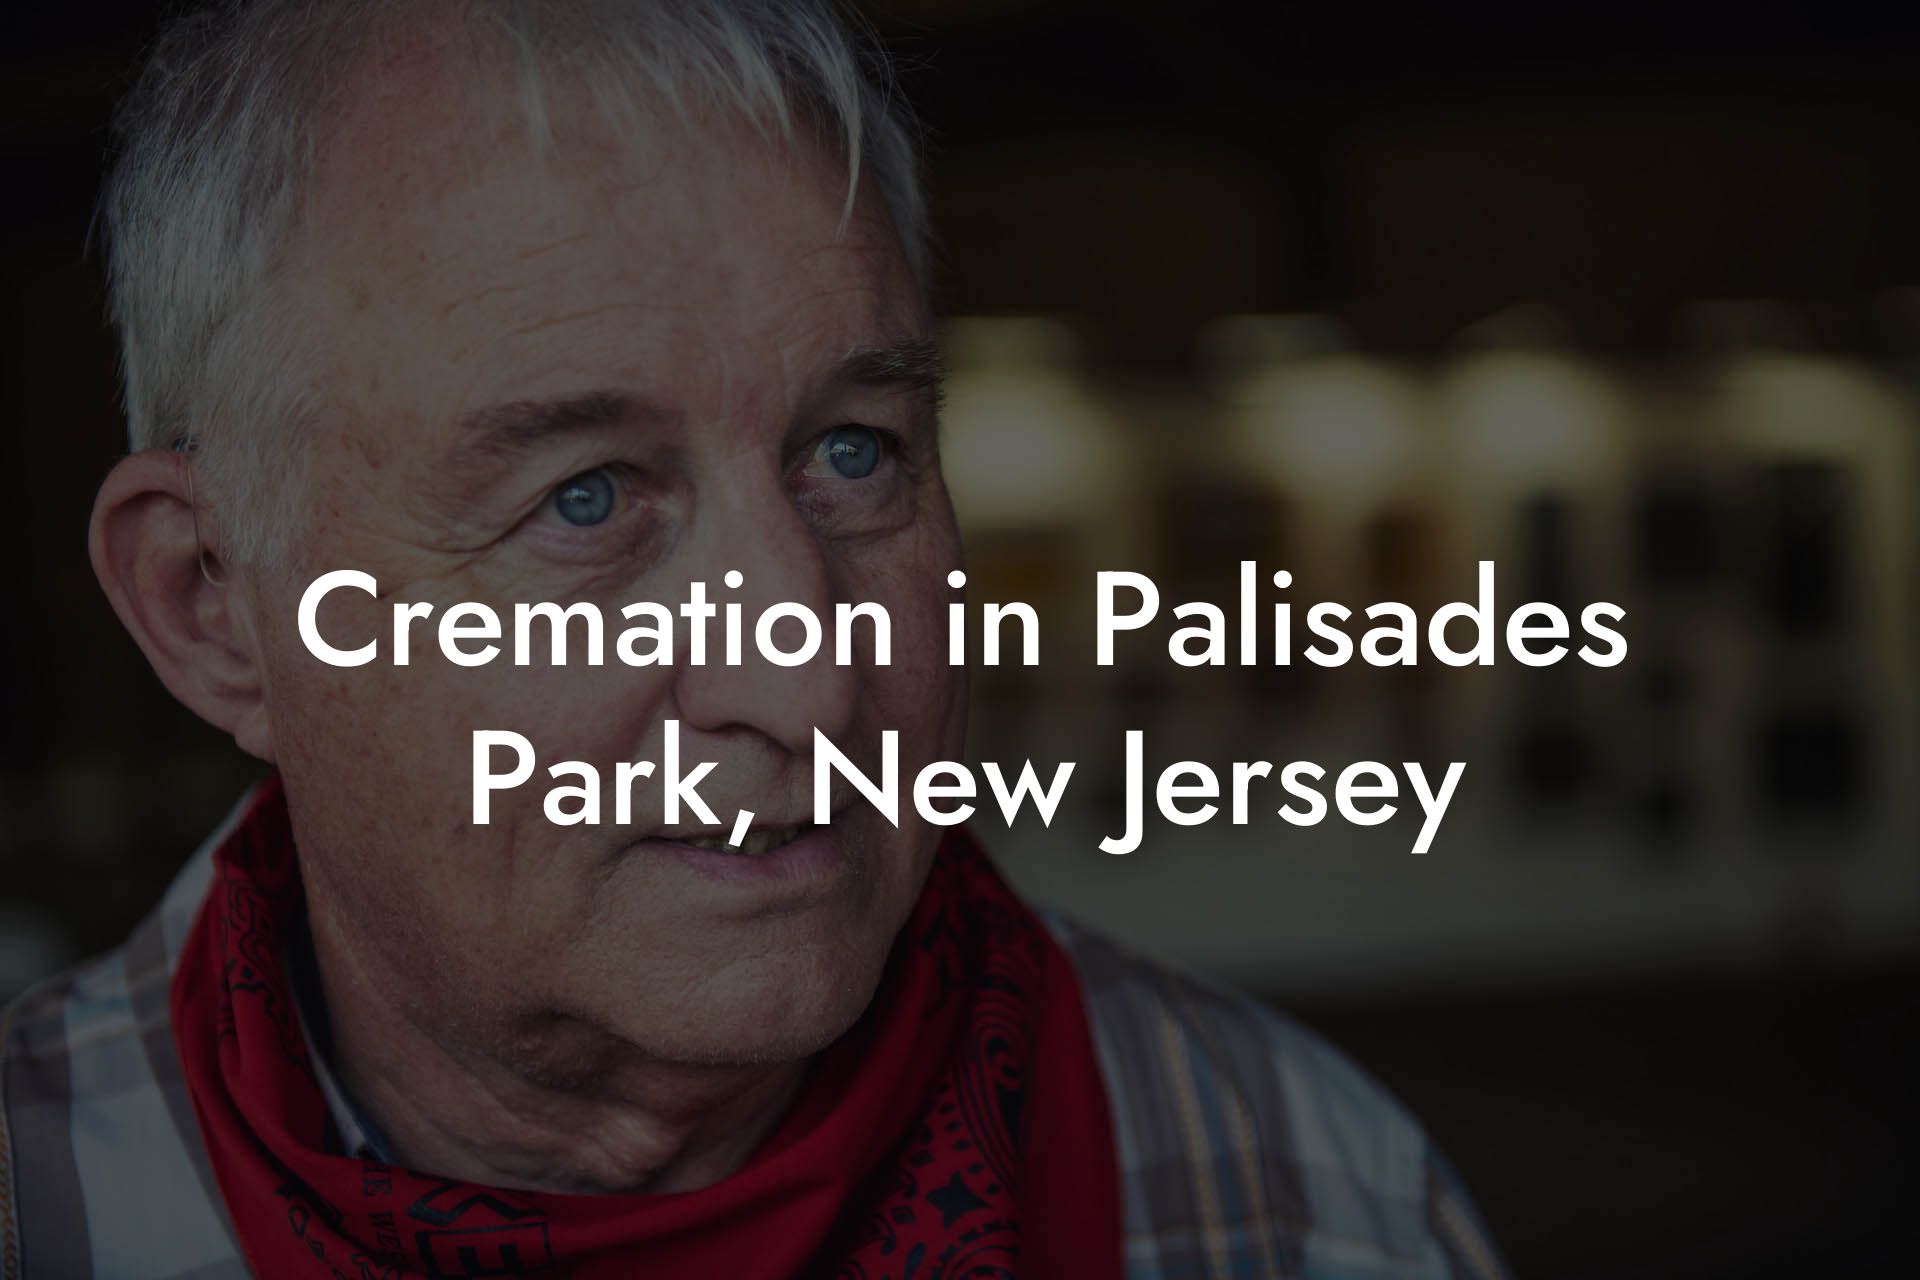 Cremation in Palisades Park, New Jersey